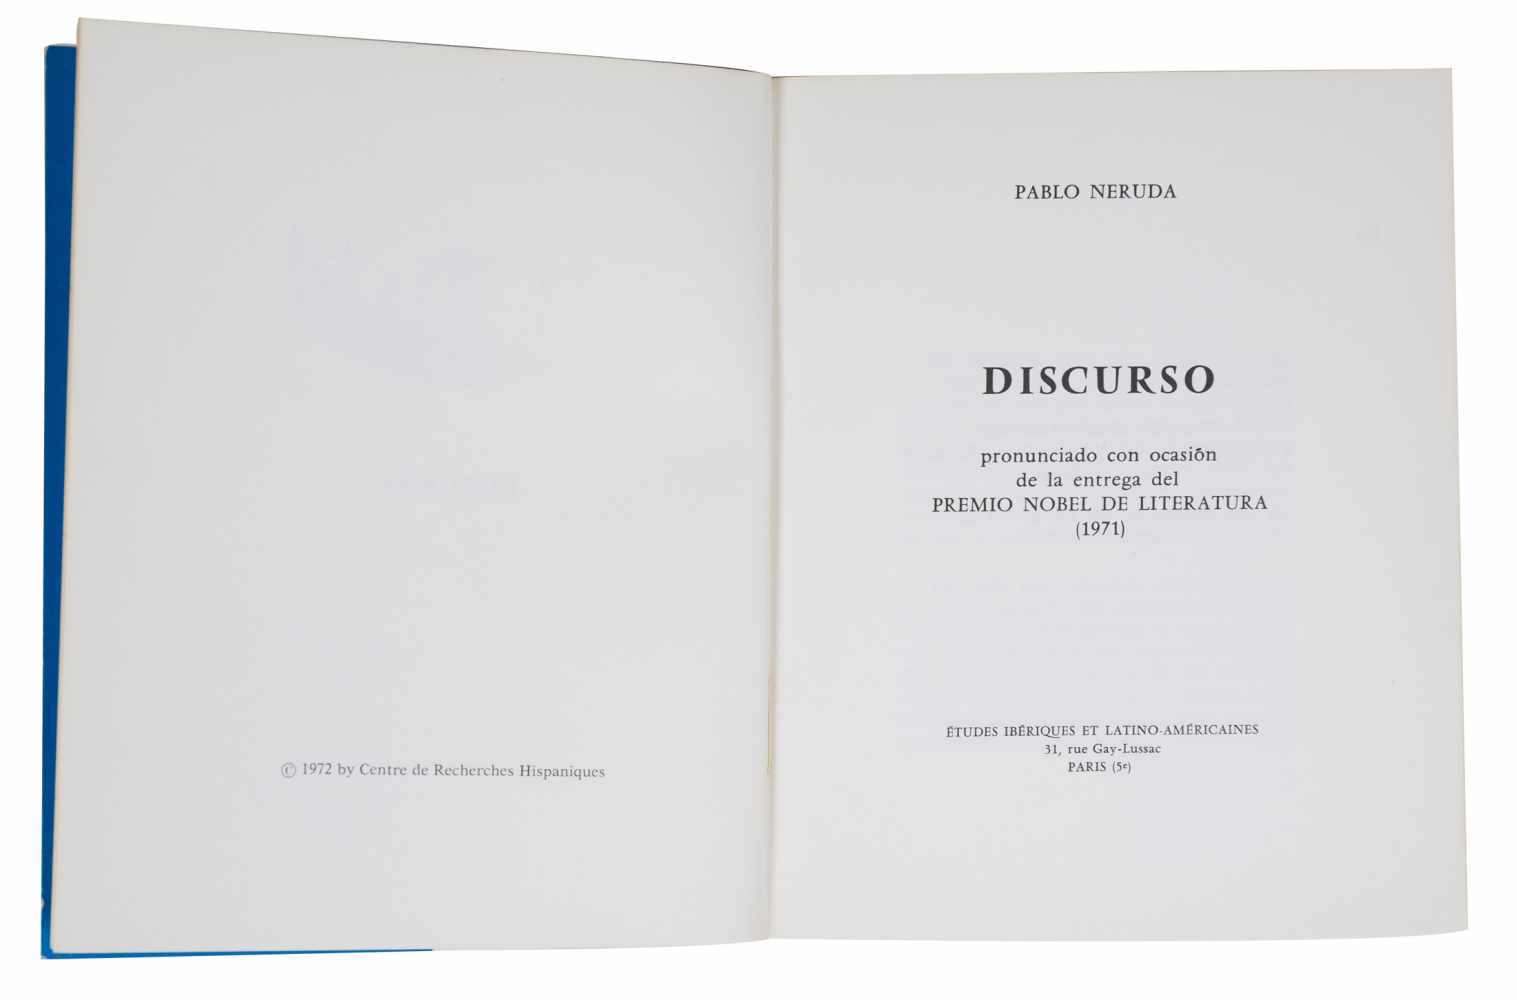 Neruda, Pablo. Speech given at the Nobel Prize for Literature awards (1971). 1st edition. Paris: